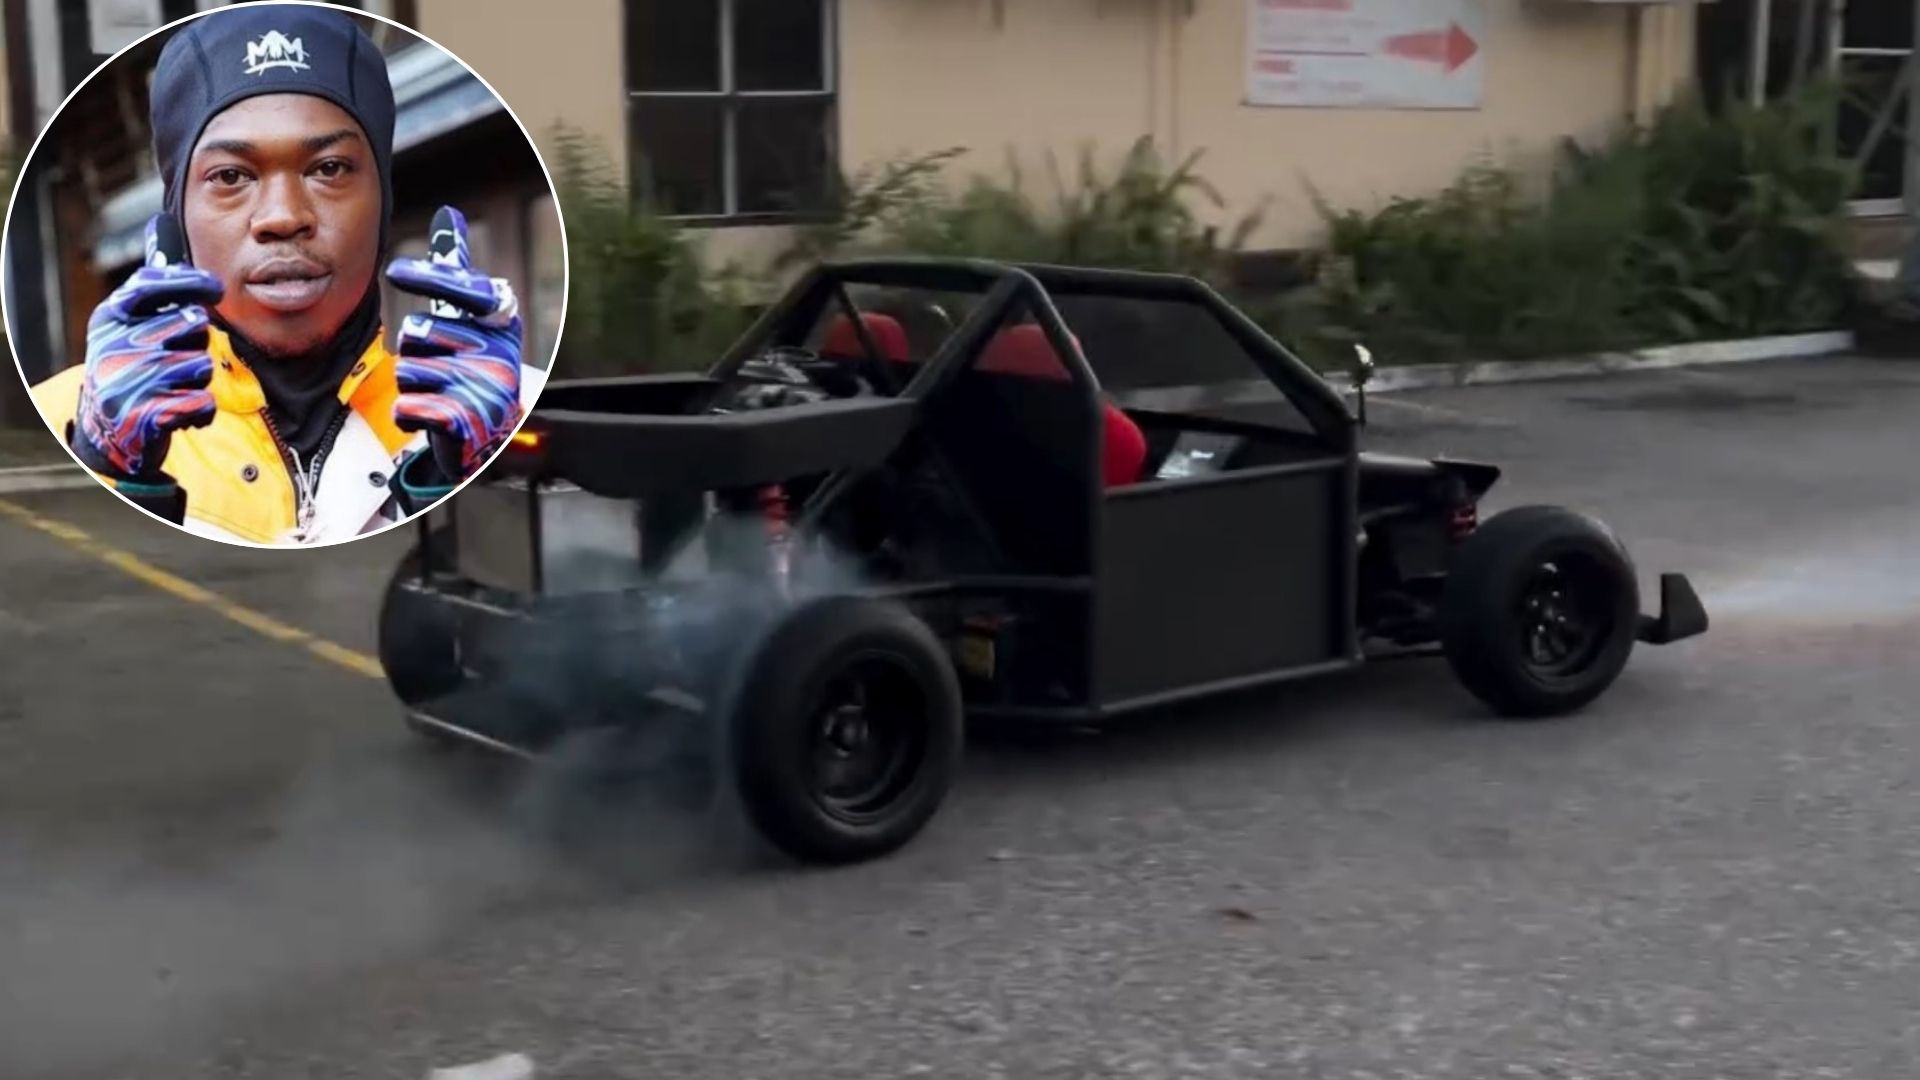 Skillibeng’s Machine in Action – Watch Video